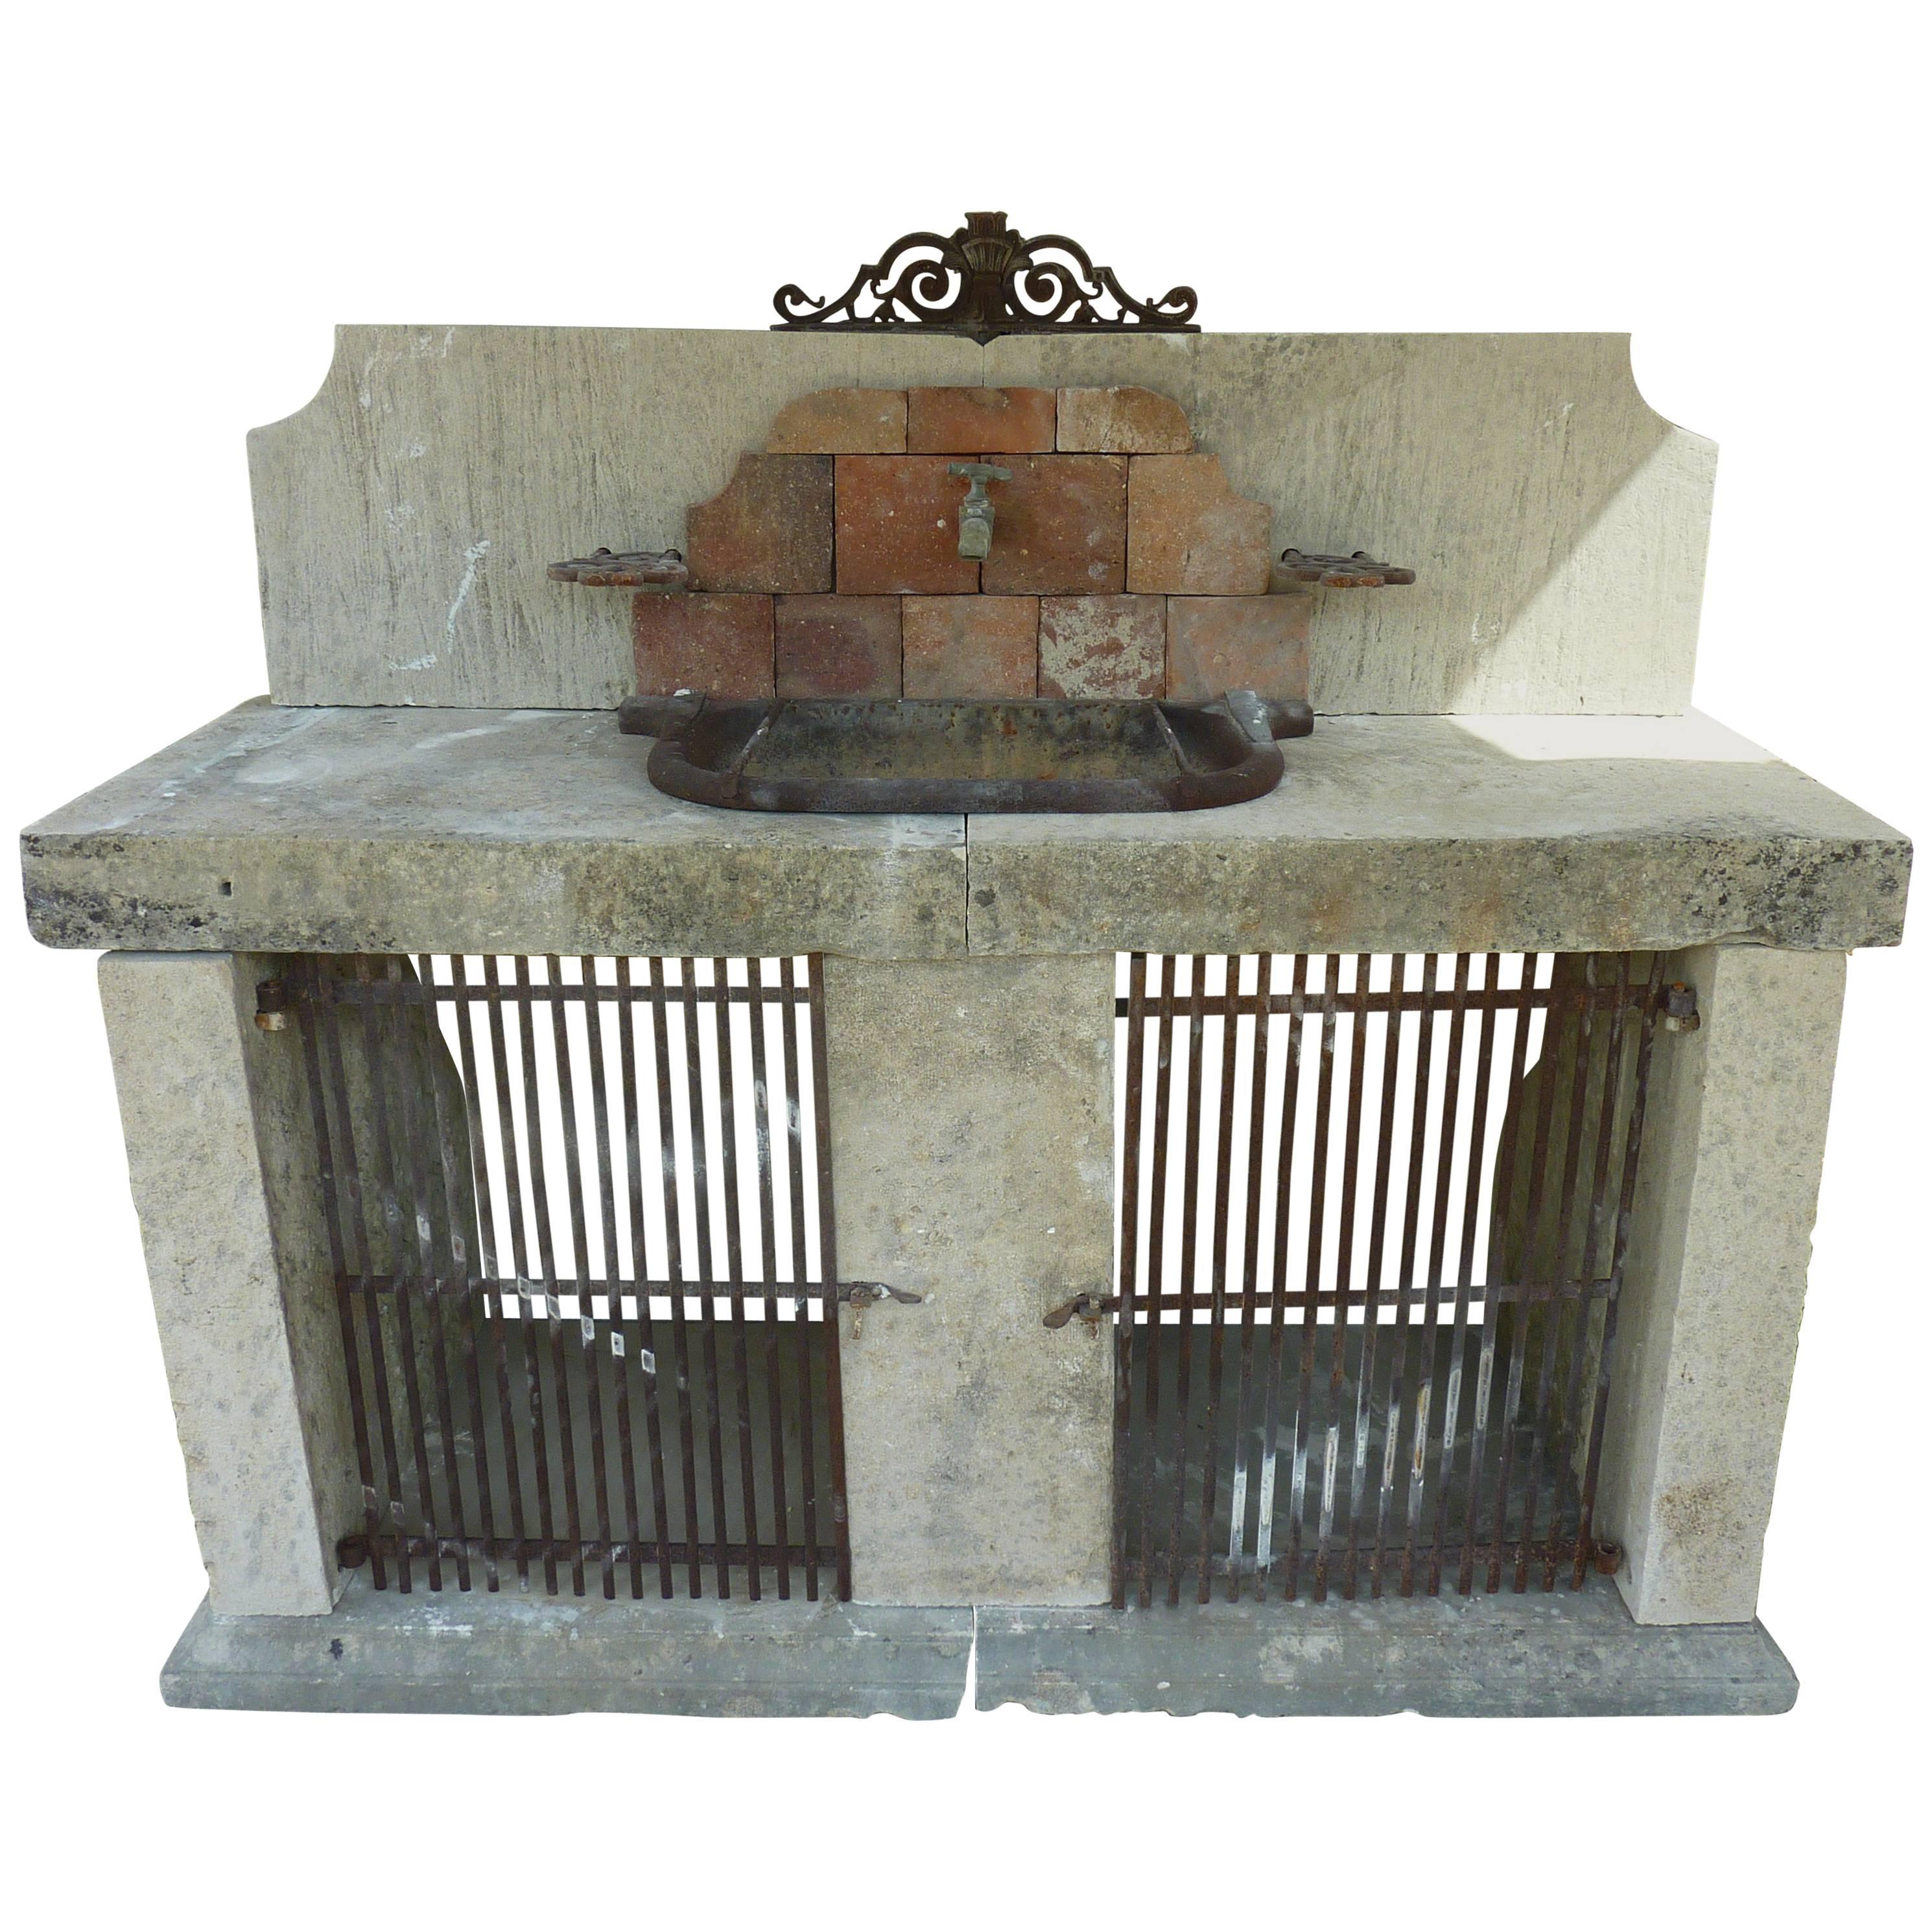 Summer Kitchen in Antique Materials with Wrought-Iron Sink and Terracotta Tiles